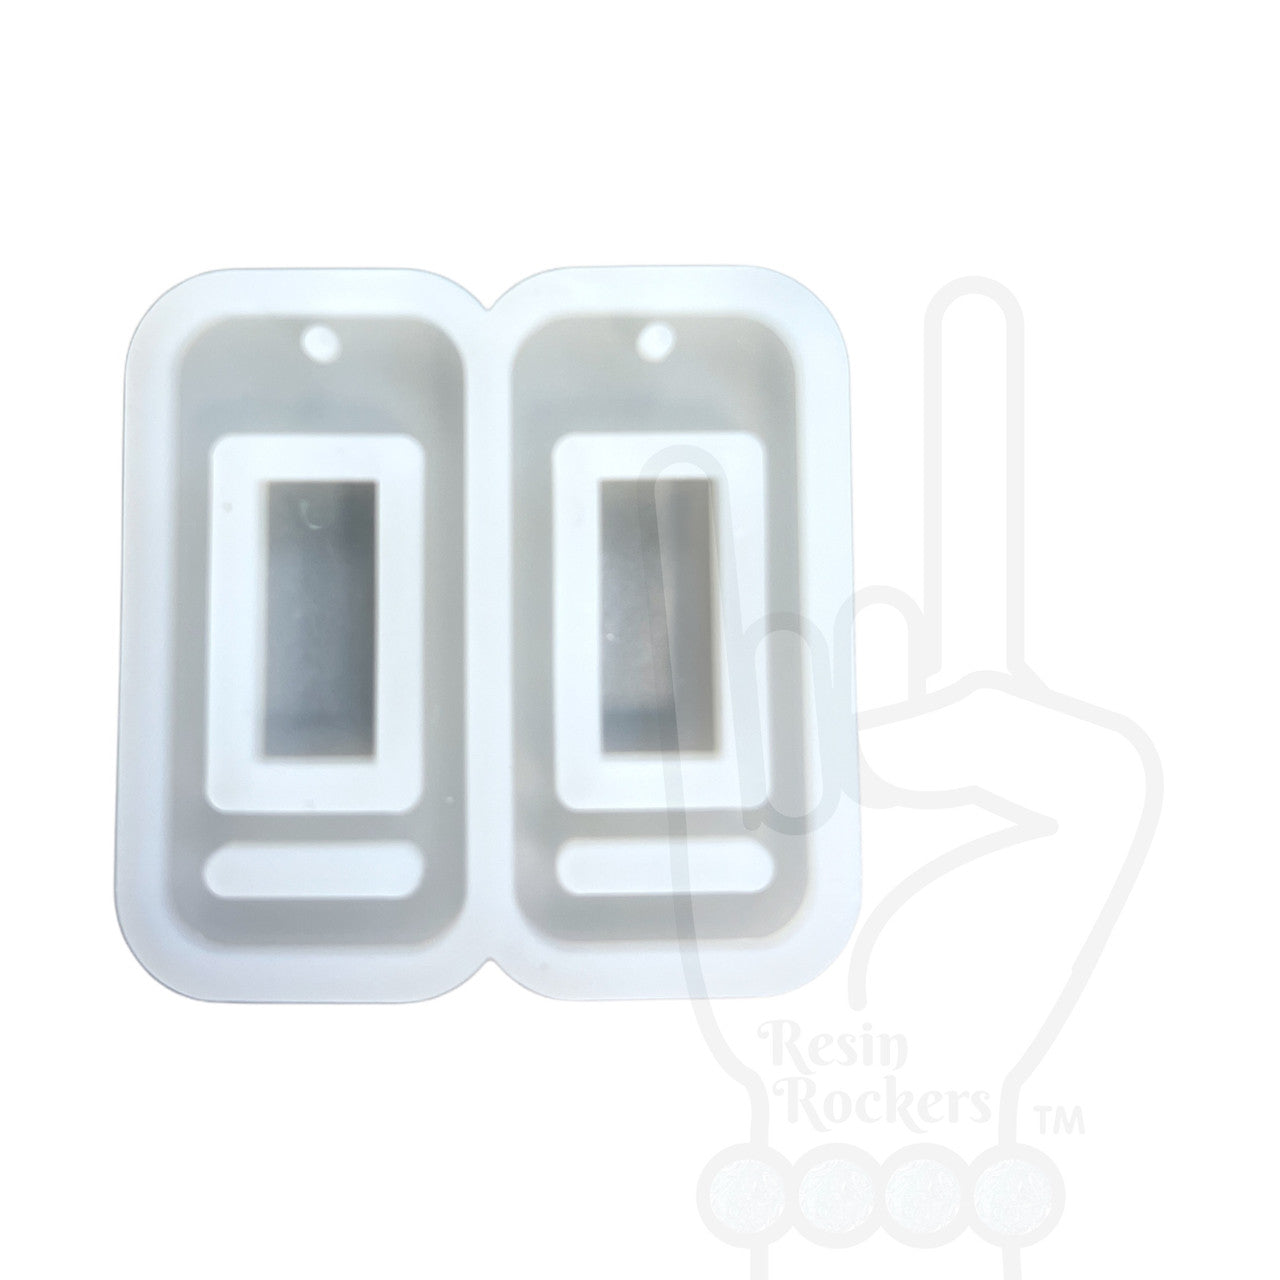 UV Safe Double Rectangle Dangle Small Earring Mold for UV and Epoxy Resin Art